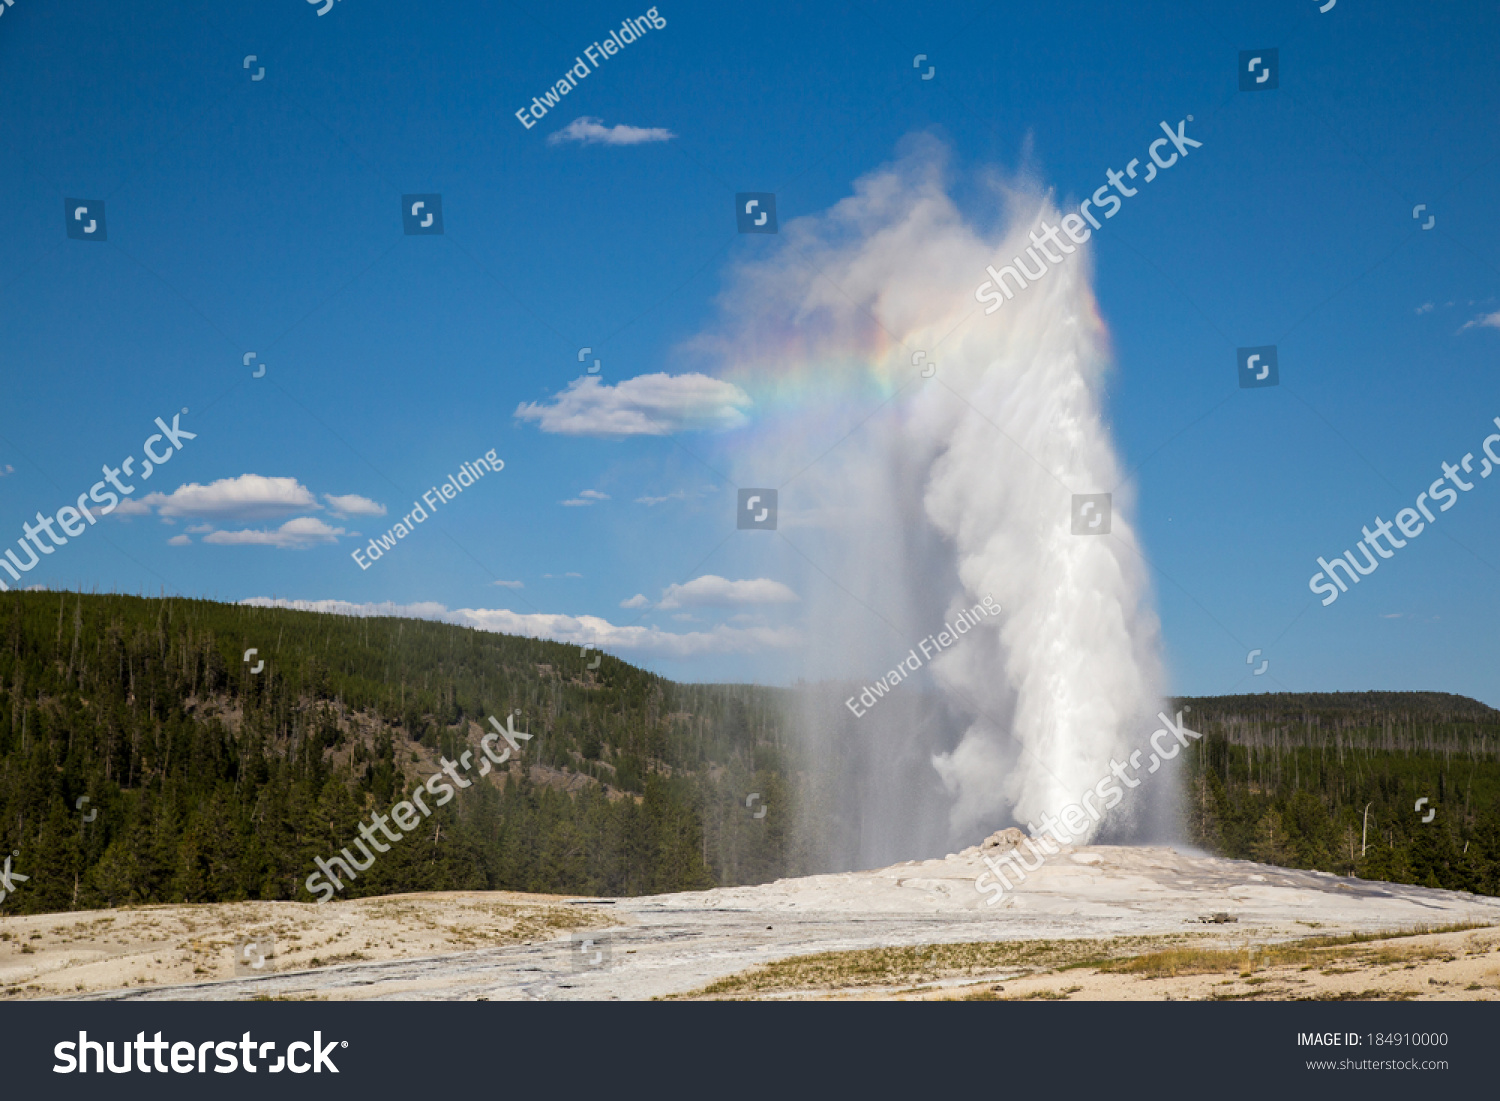 Errupting Old Faithful Geyser in Yellowstone National Park with rainbow. #184910000